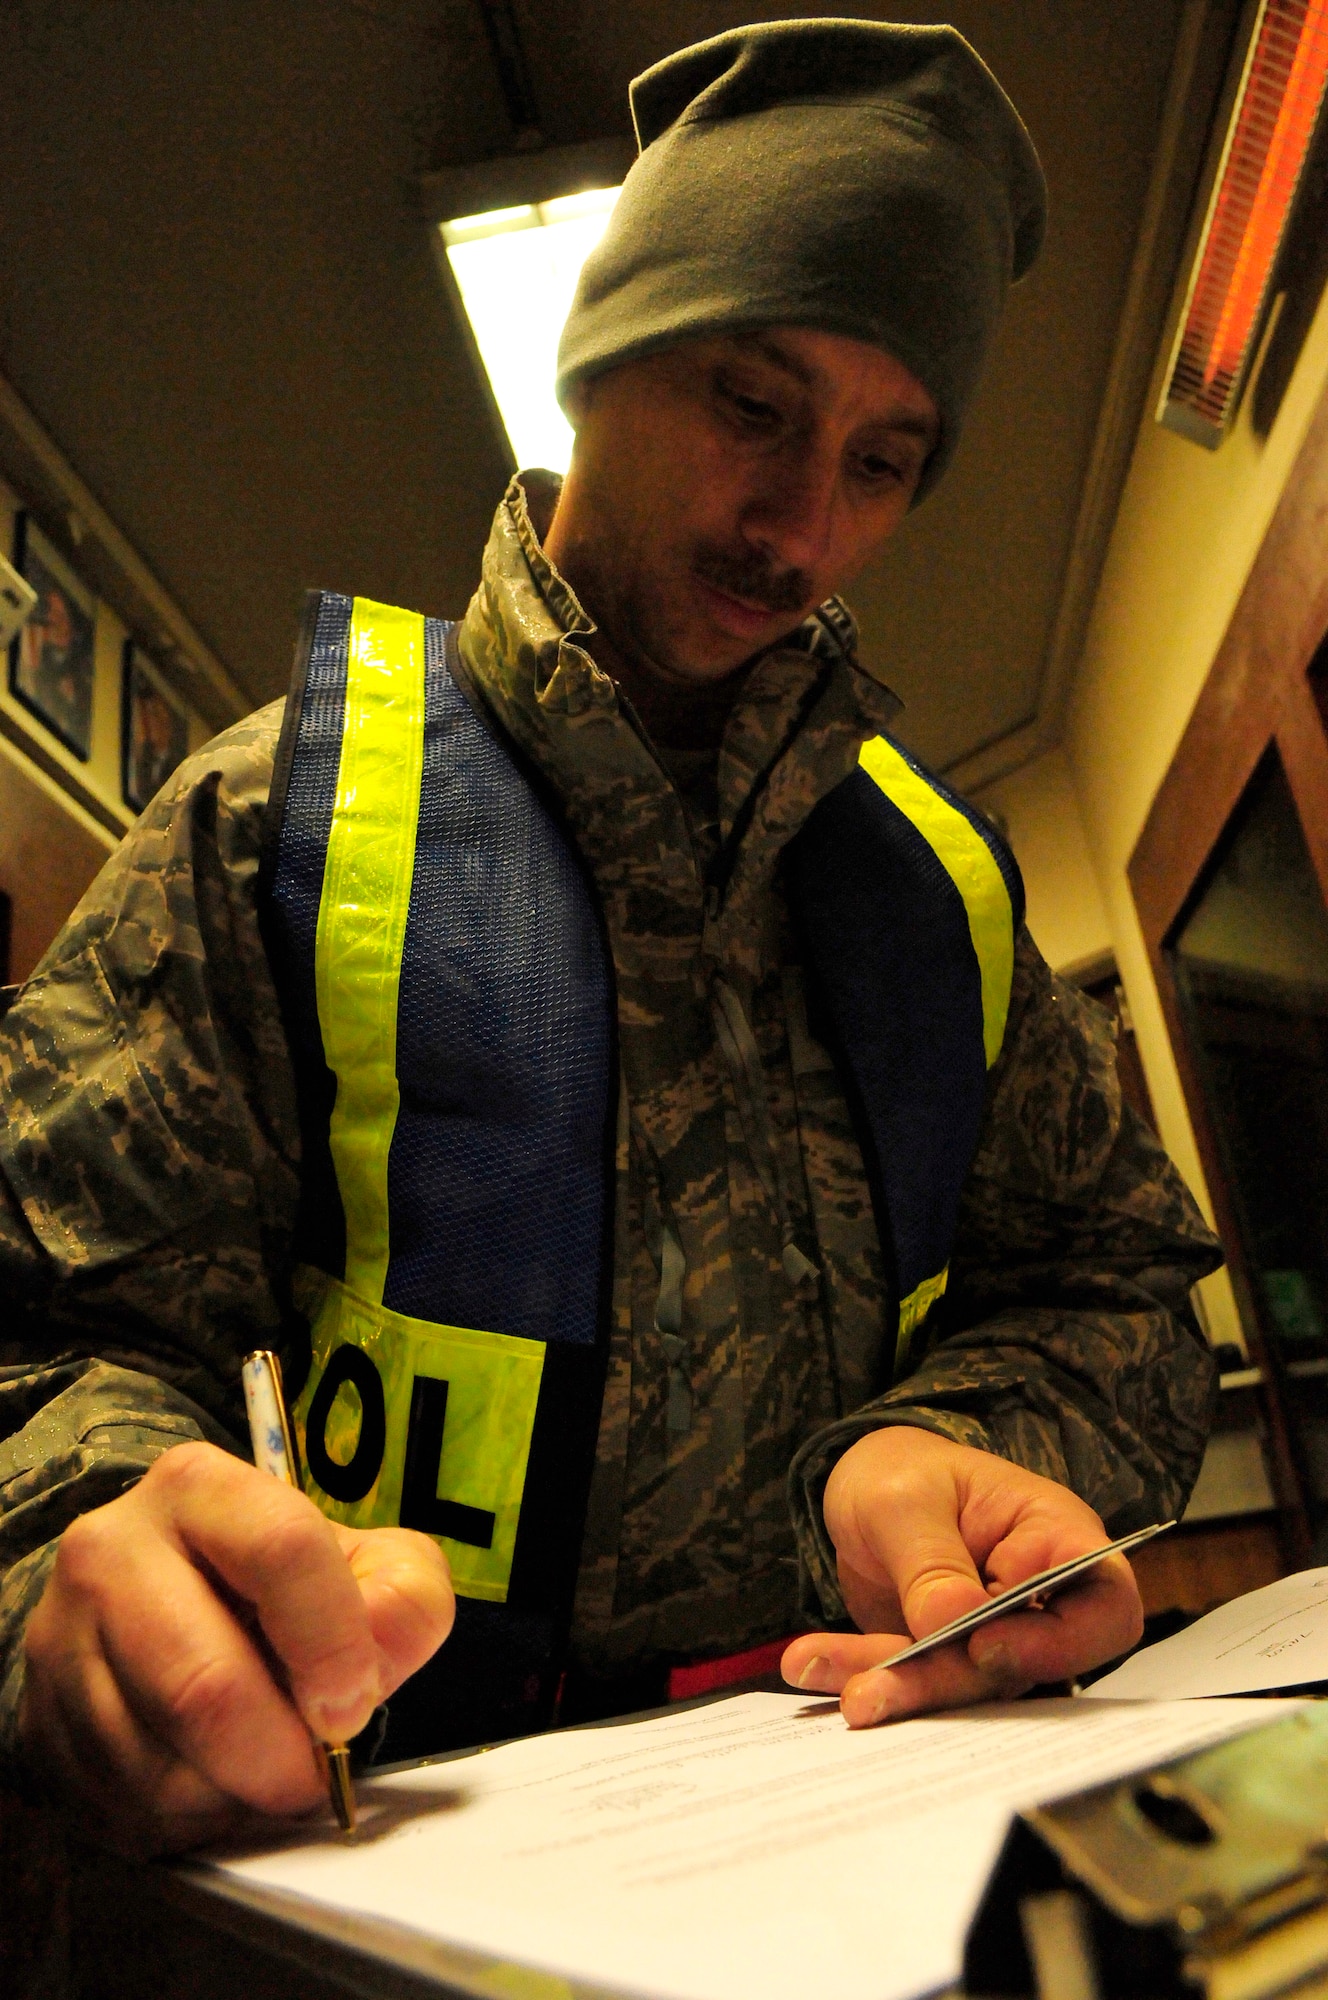 Master Sgt. David Greene, 2nd Air Postal Squadron first sergeant, documents identification information while participating in a sobriety checkpoint at Ramstein Air Base, Germany, Feb. 7, 2009. Sobriety checkpoints are being held randomly throughout the Kaiserslautern Military Community in an effort to enforce a zero tolerance policy against driving under the influence of drugs and alcohol. 

(U.S. Air Force photo by Staff Sgt. Stephen J. Otero) 